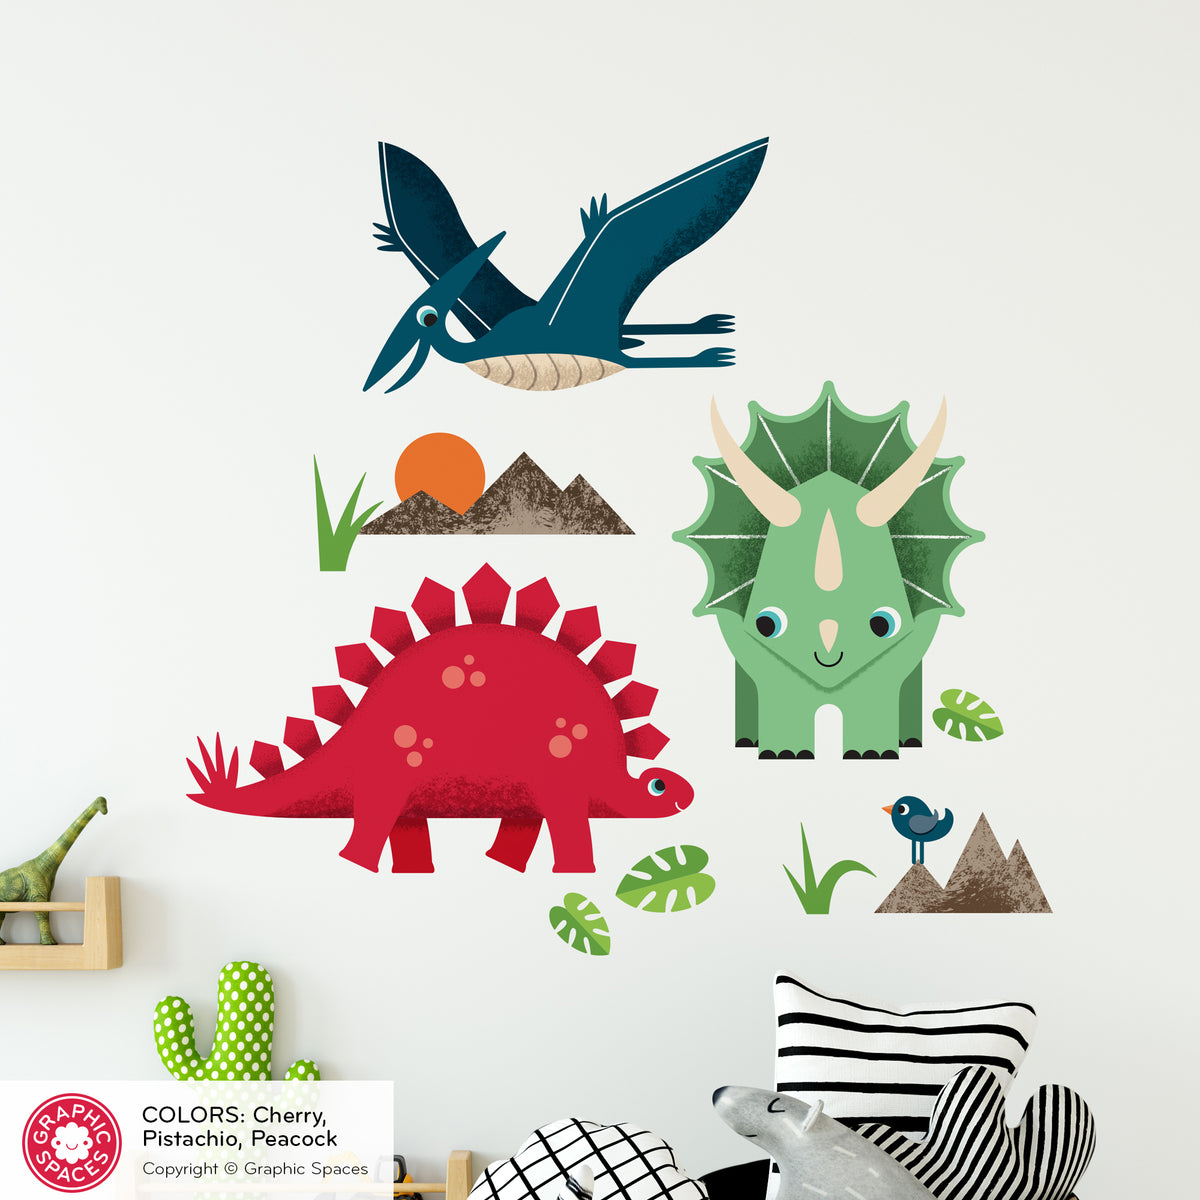 Dinosaur Fabric Wall Decal, Pack of 3